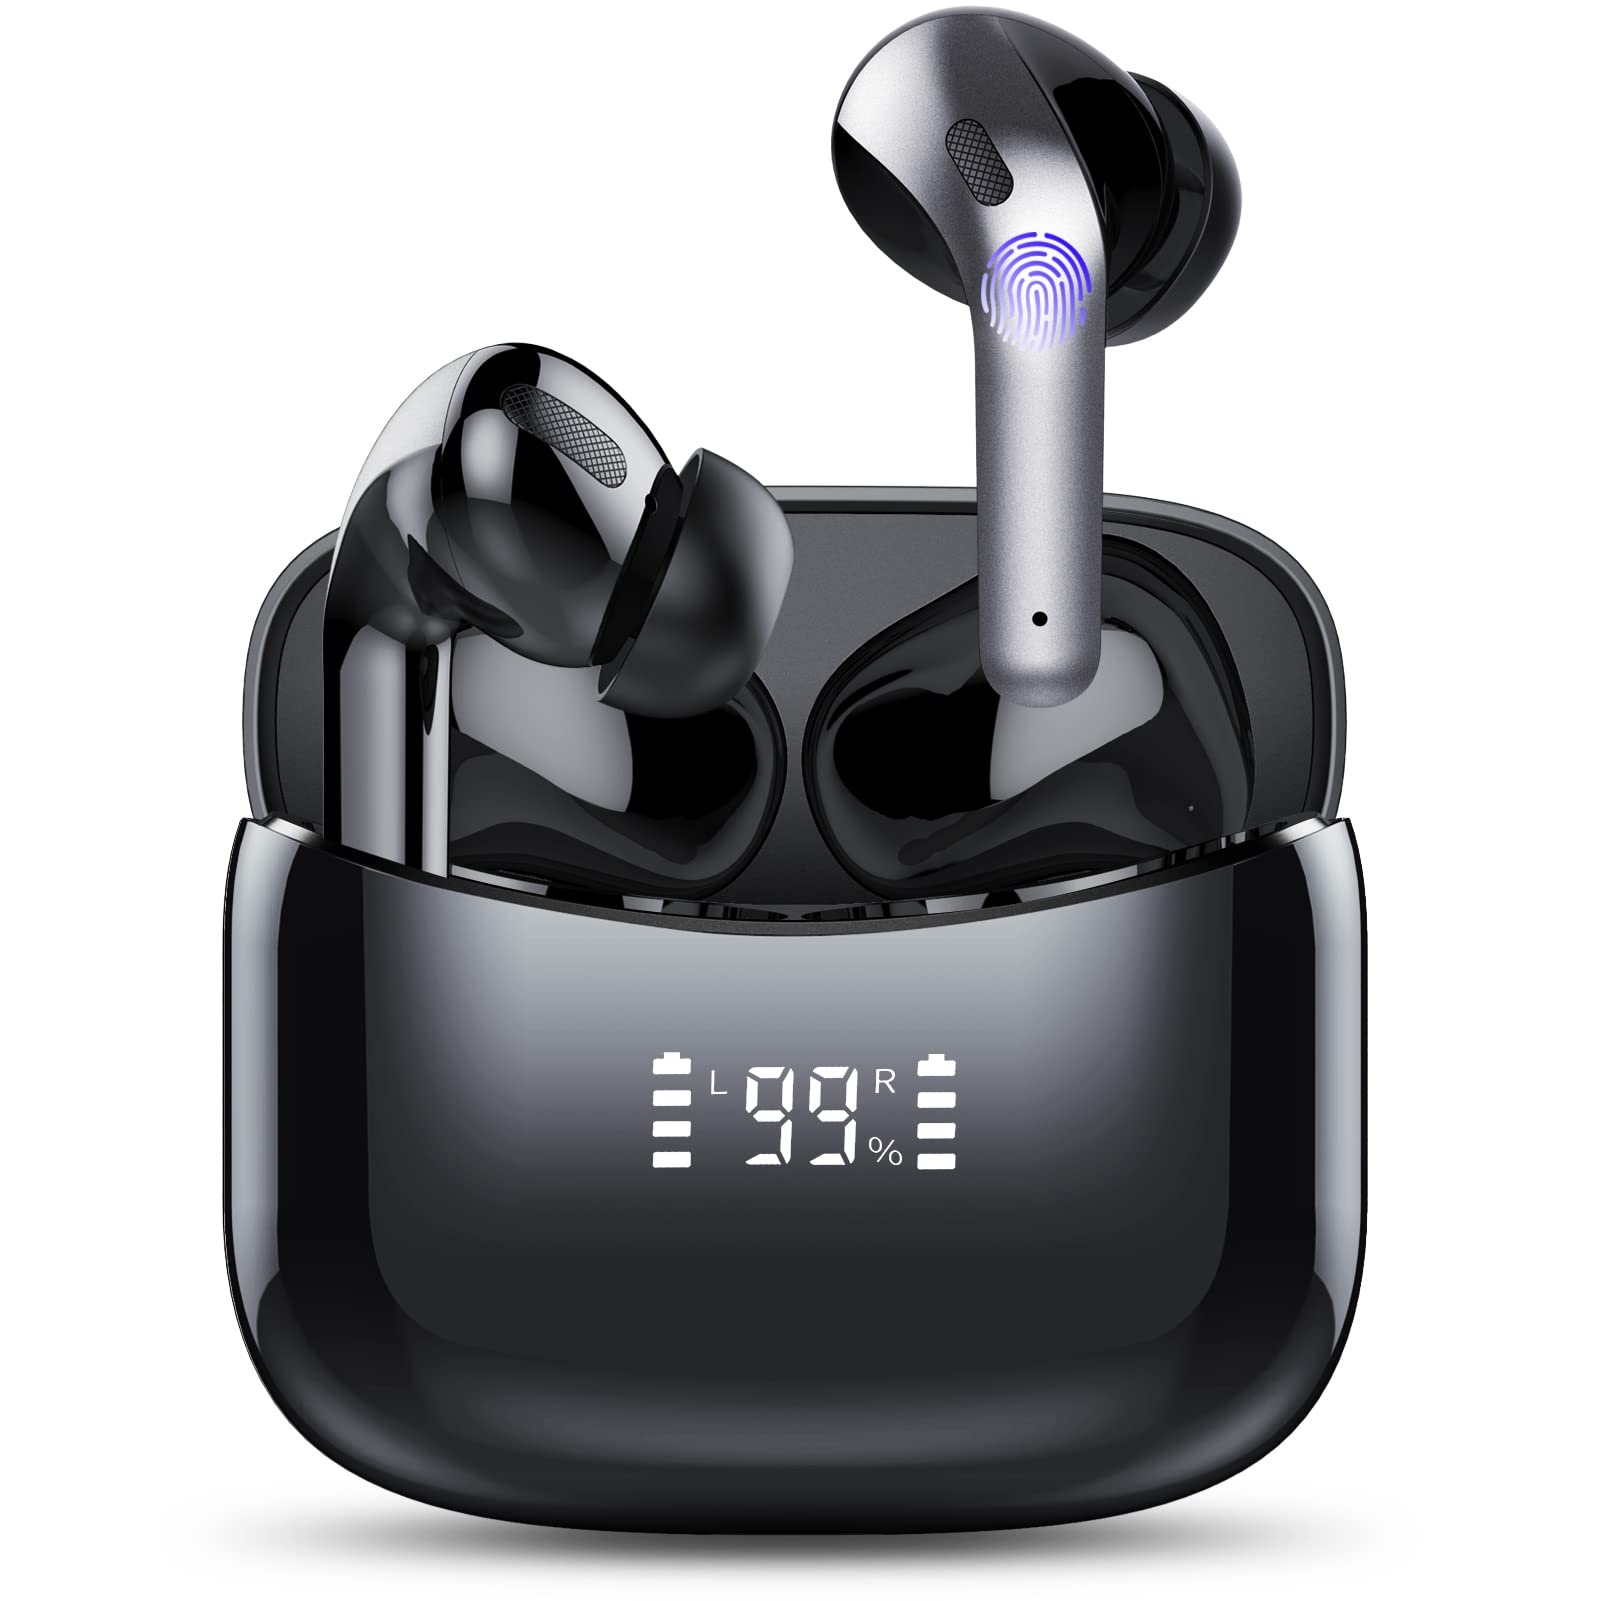 Connecting Guide For Brookstone Wireless Earbuds